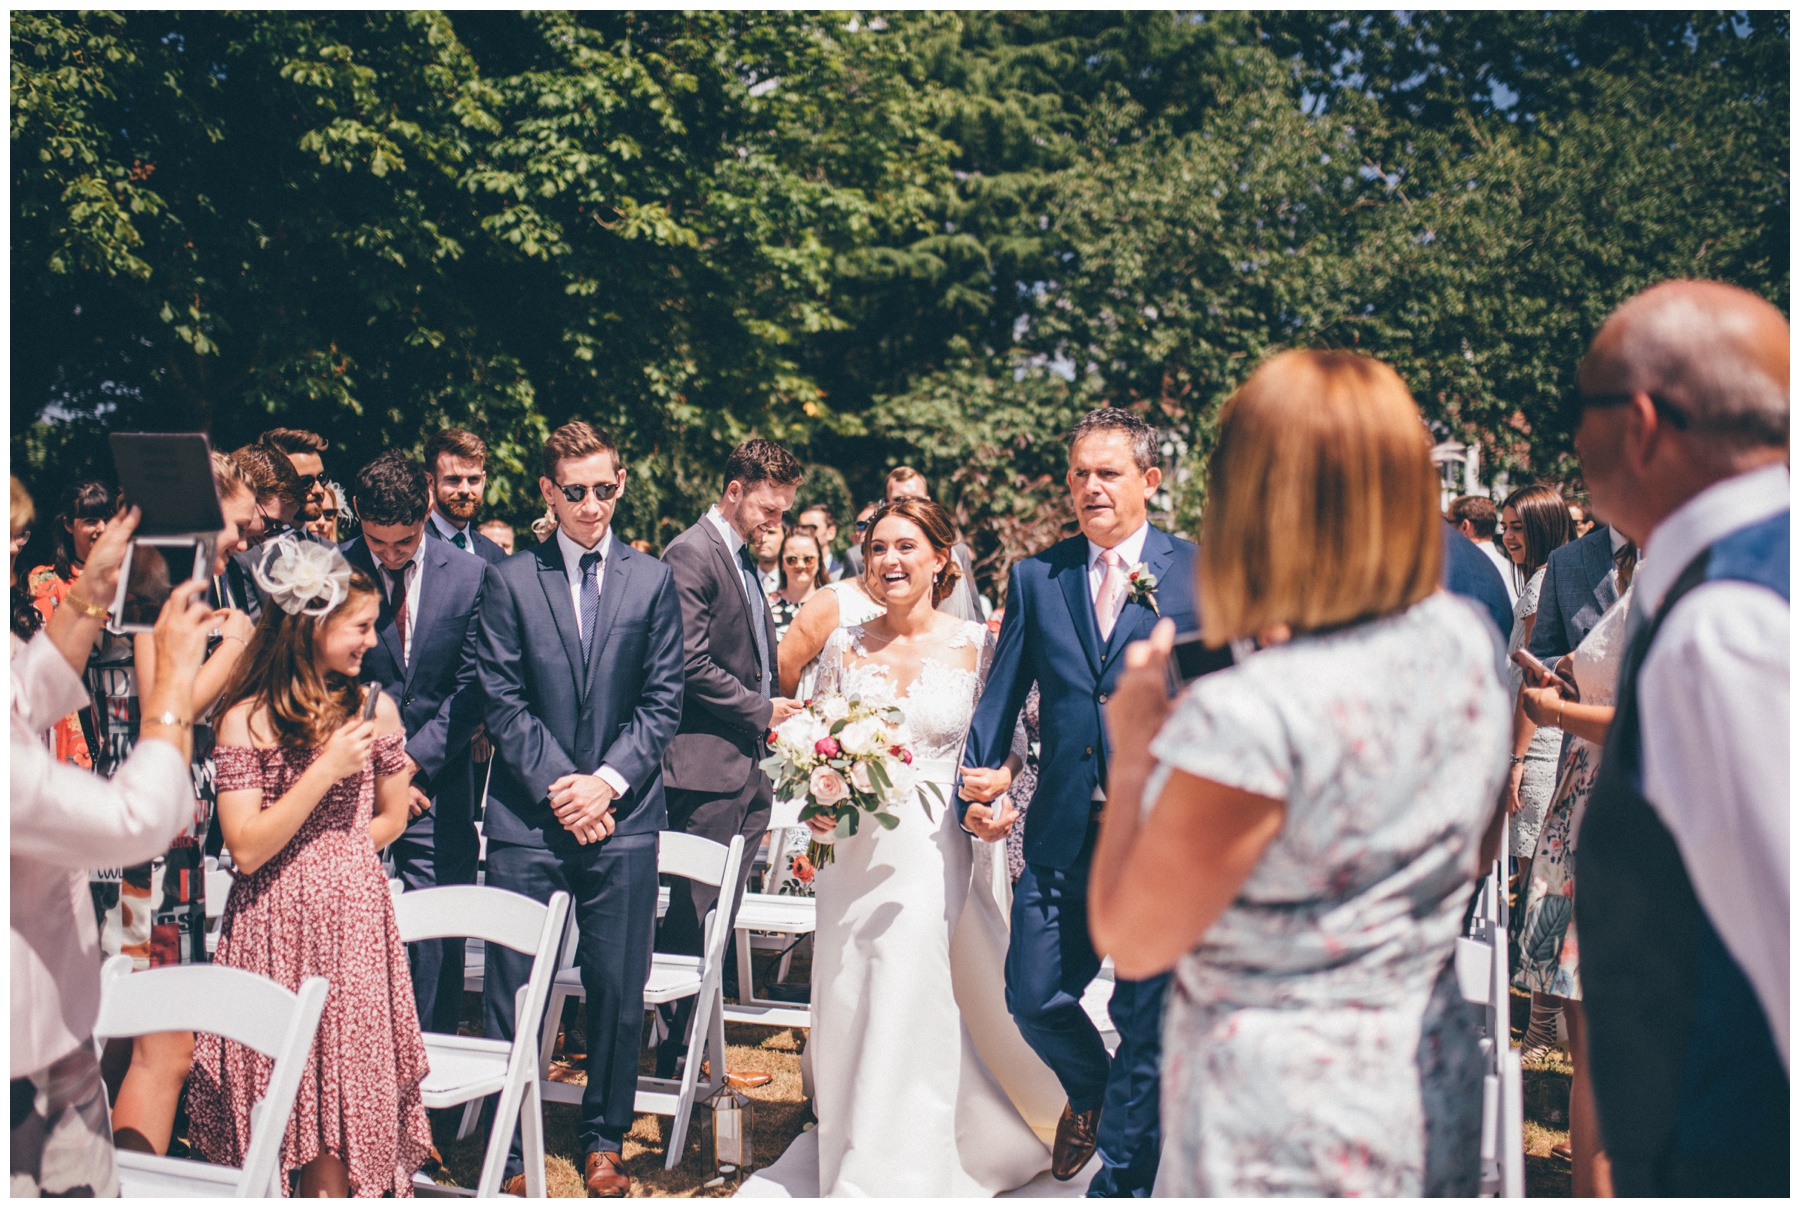 Bride walks down the aisle with her Dad at her outdoor wedding ceremony at Tilstone House.